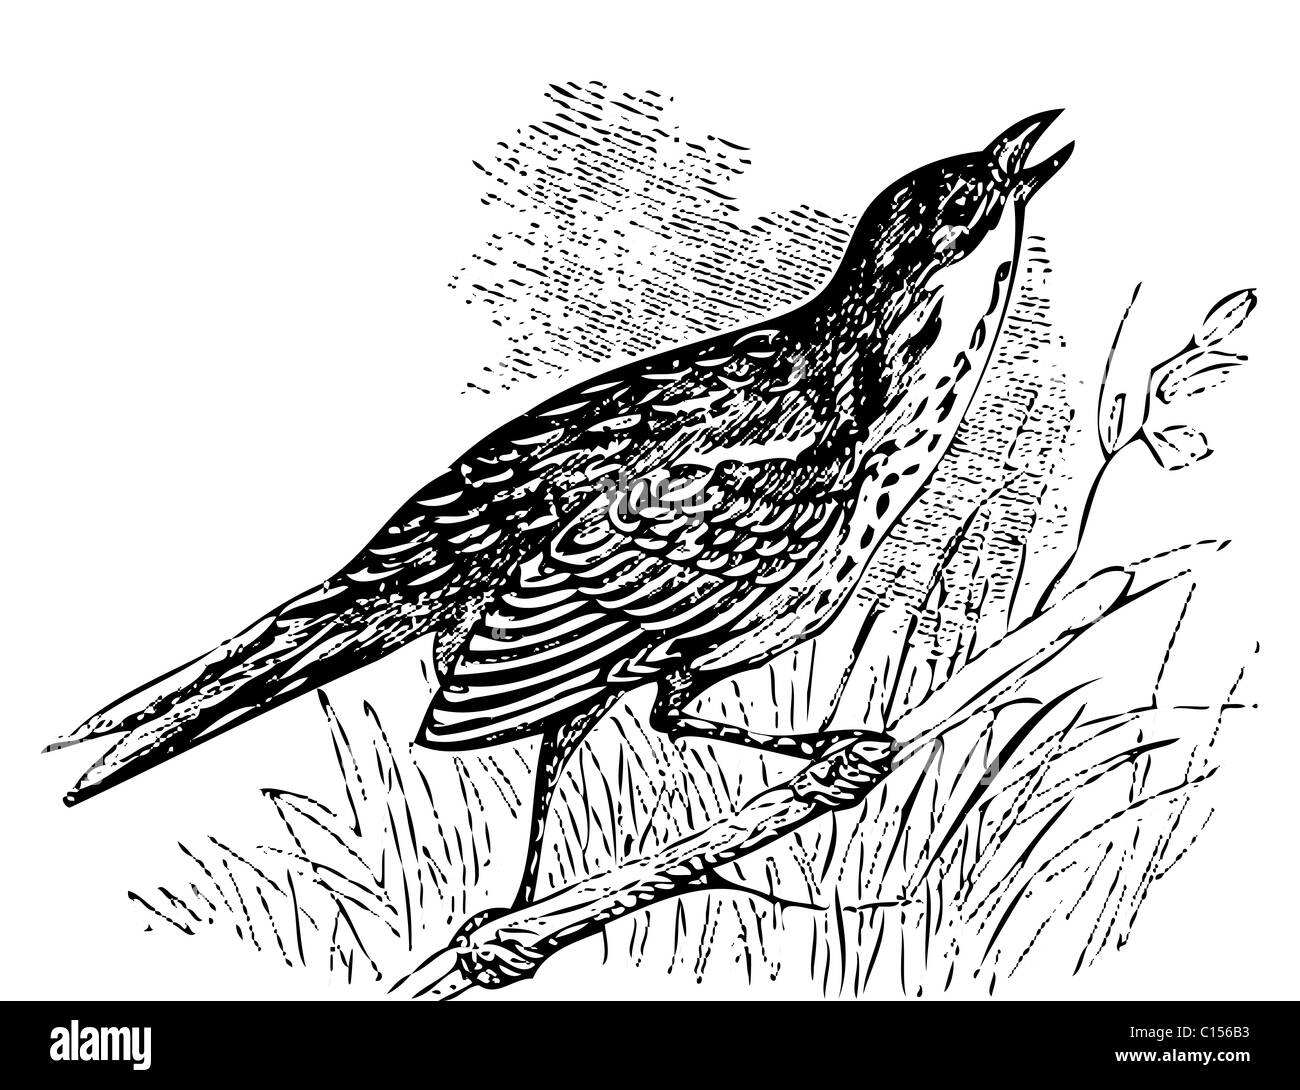 Old engraved illustration of a Saltmarsh sharp-tailed sparrow or Ammodramus caudacutus, singing while perched on a branch. Stock Photo